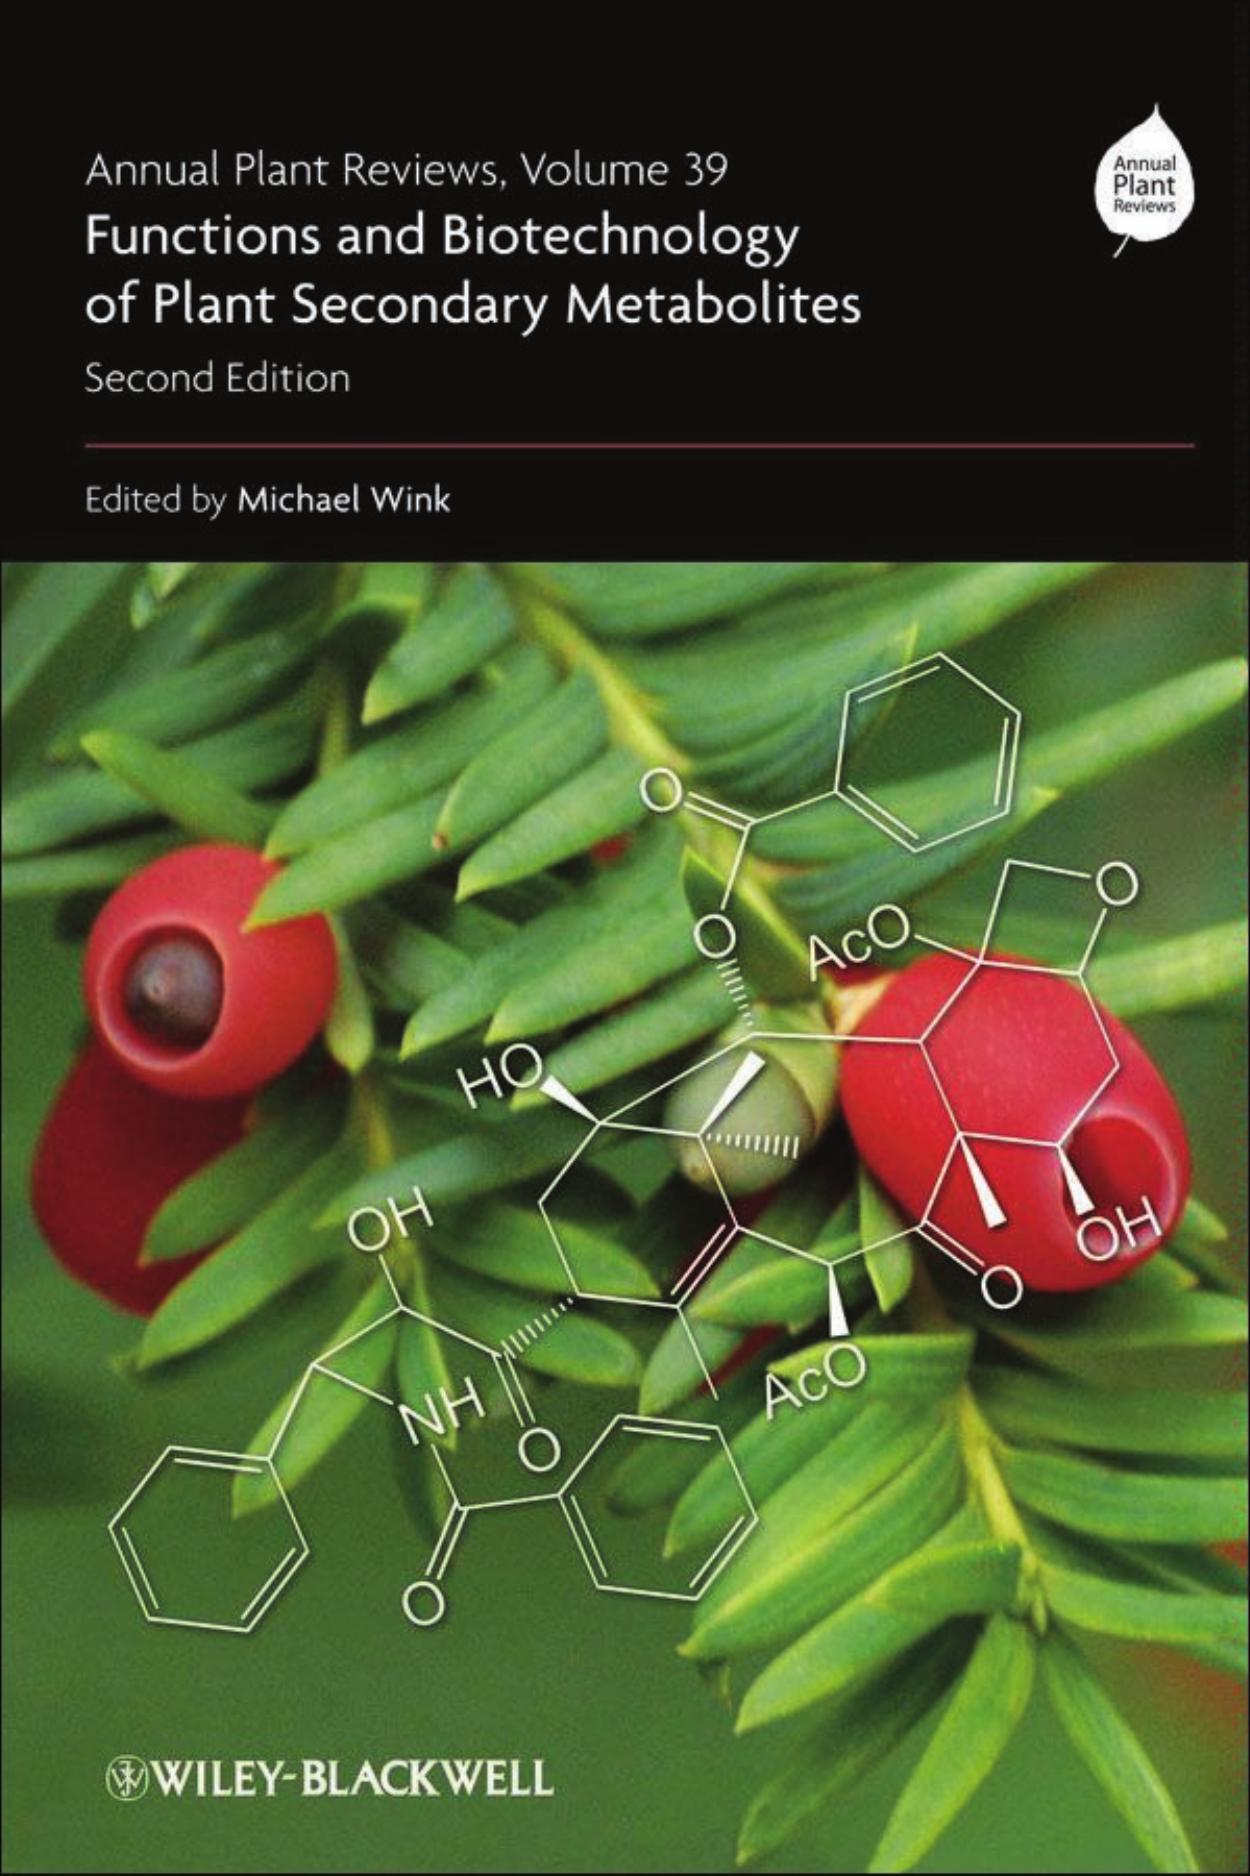 Annual Plant Reviews, Functions and Biotechnology of Plant Secondary Metabolites (Volume 39, 2)